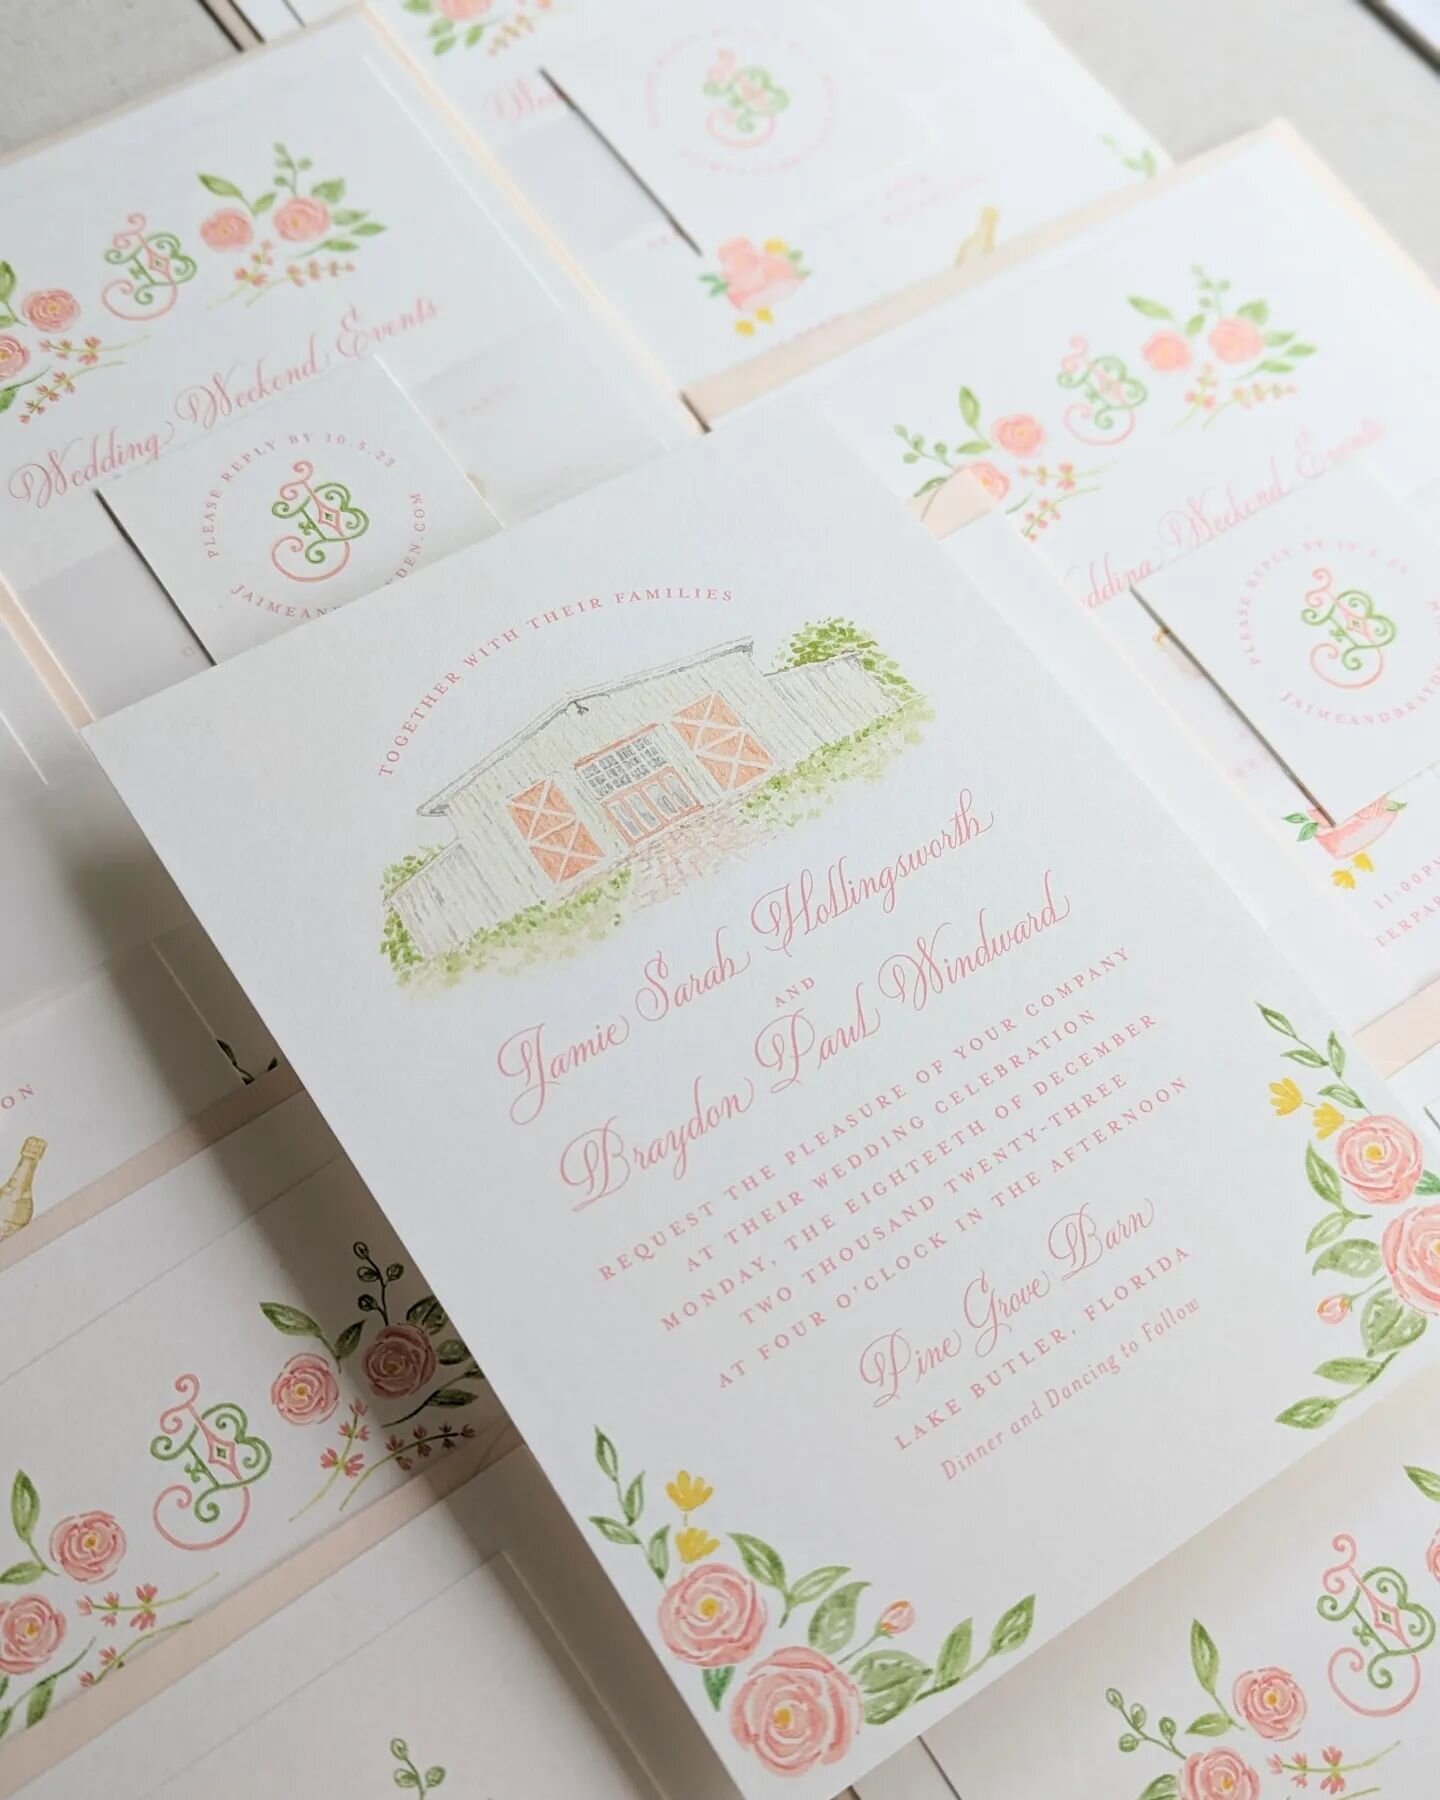 Creating custom watercolor artwork is such a rewarding part of my job as a wedding stationer. I love including an illustration of the wedding venue, especially if it holds special meaning to the couple.